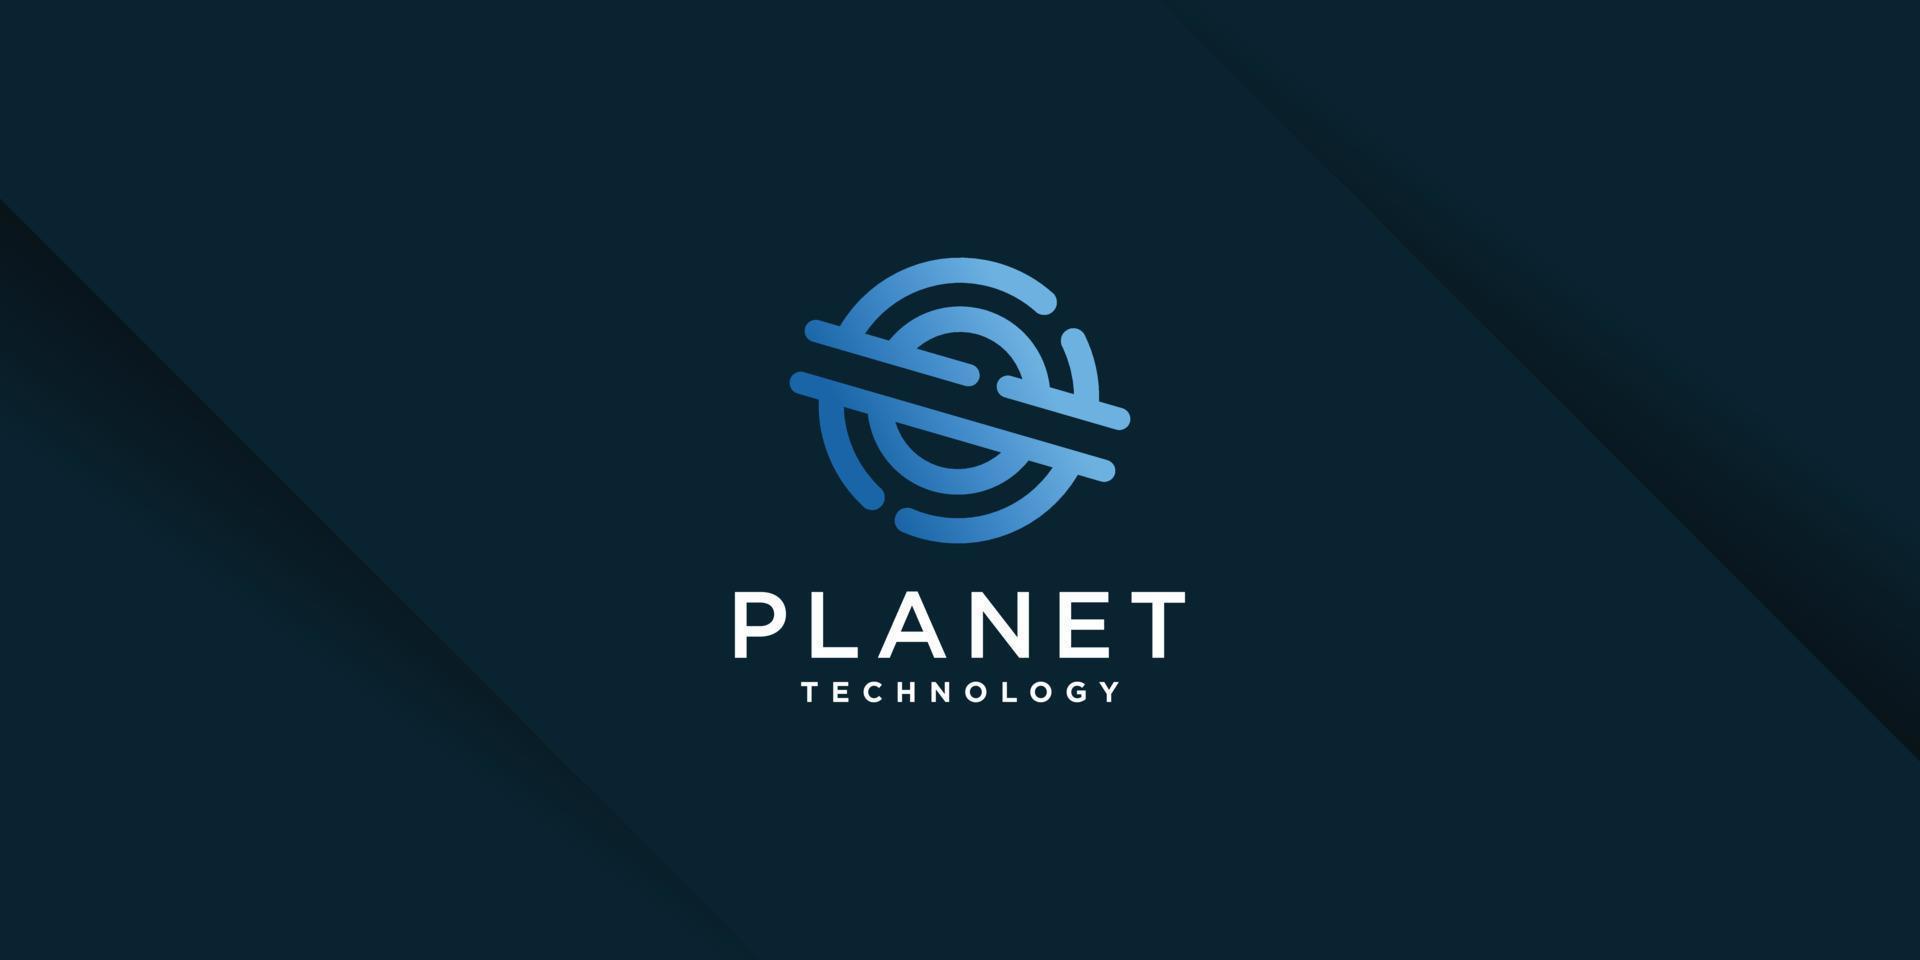 Planet logo template with creative elements for business Premium Vector part 4